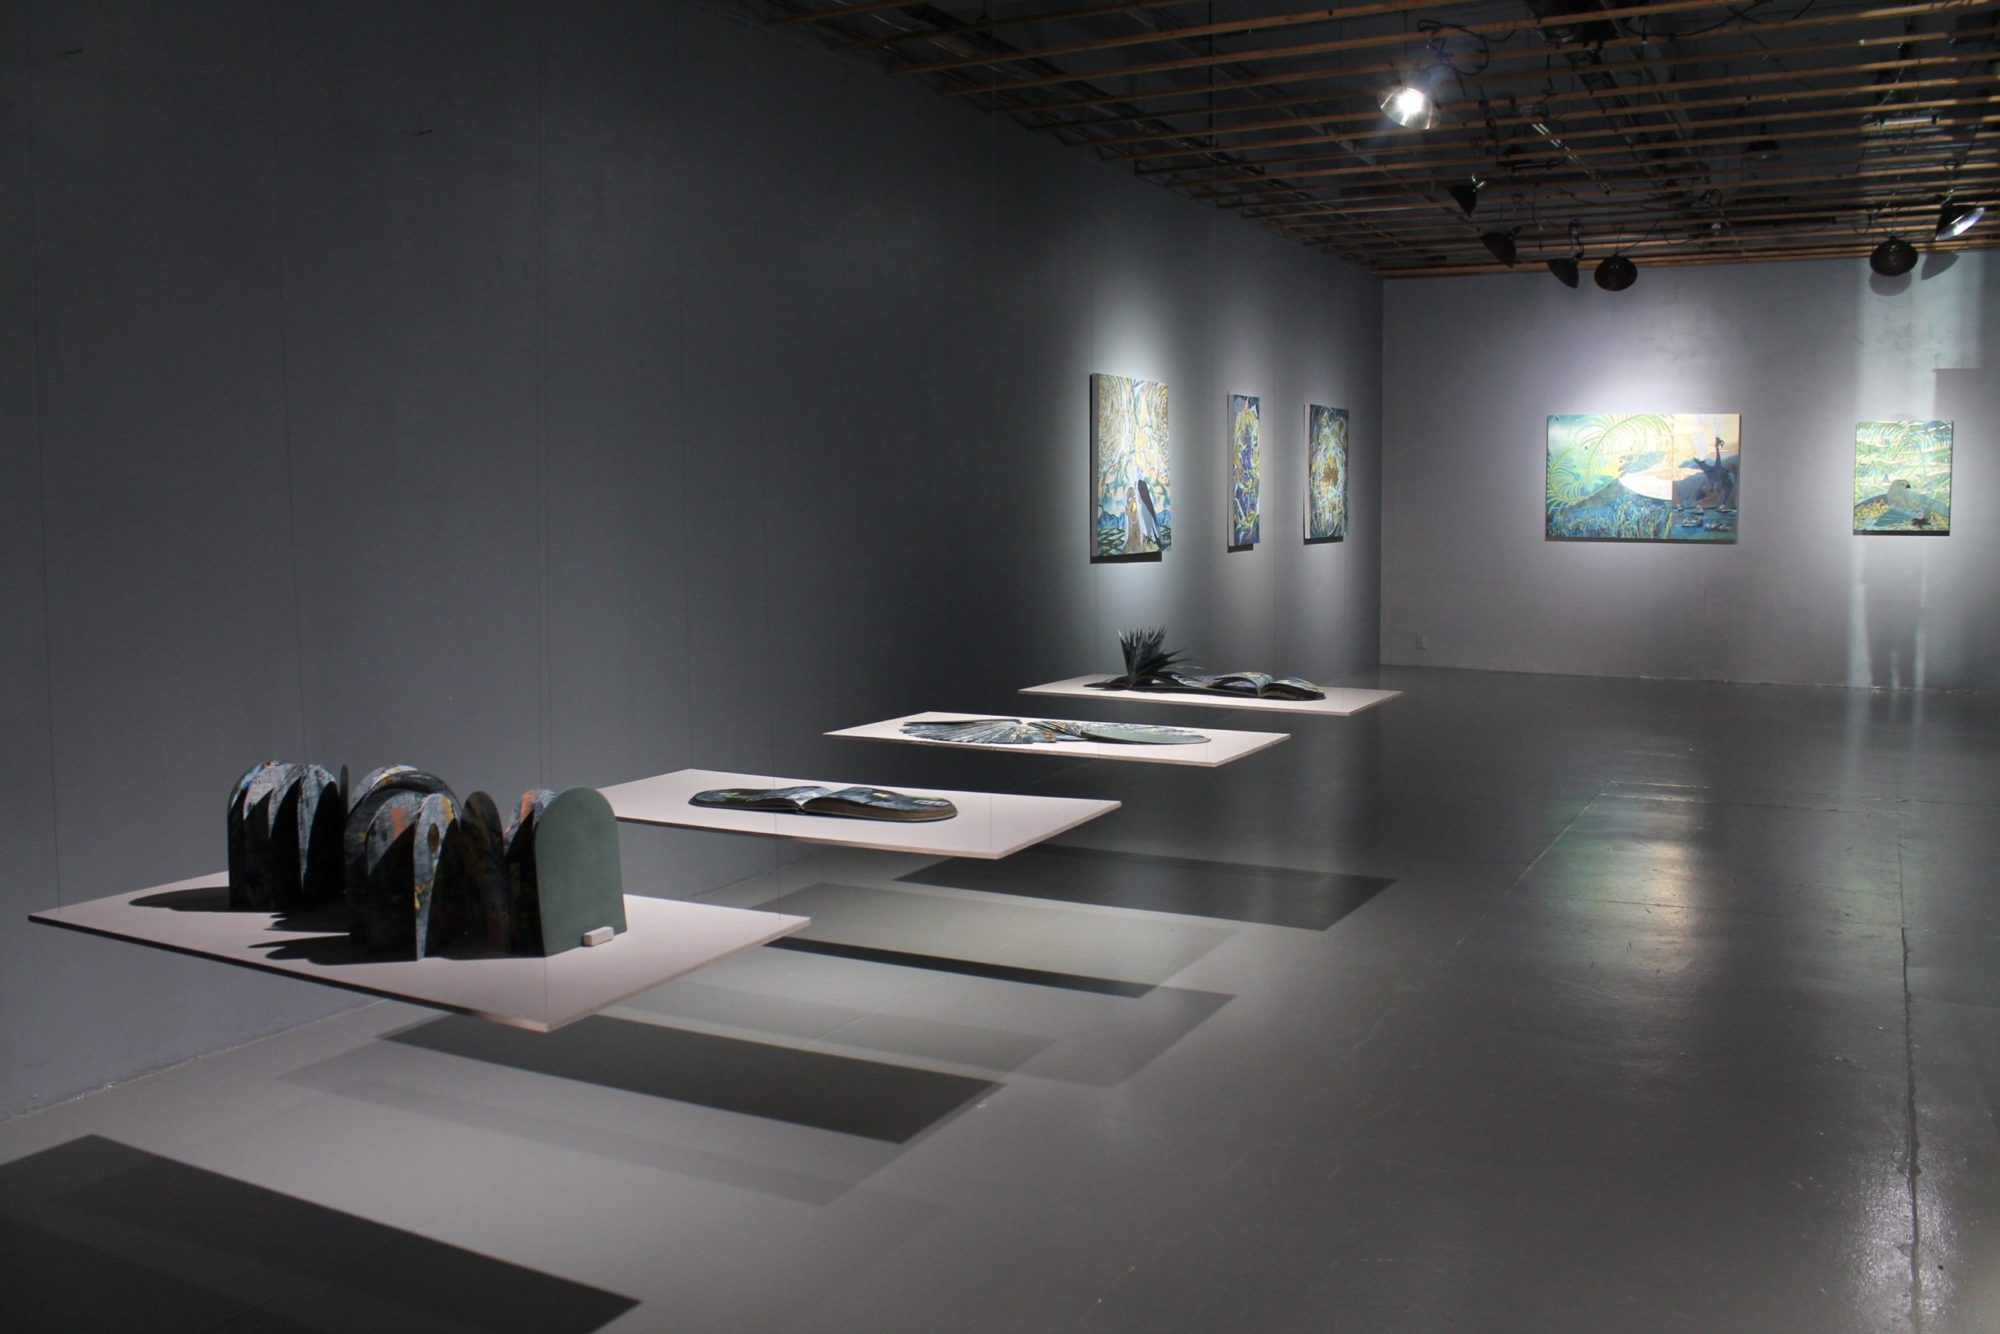 A wider gallery view focusing on Tammy Nguyen's artist books. The four artist books are on floating tables suspended from the ceiling along the left wall in view. Each is on its own table. Farther down the left wall are three paintings on the same wall and two paintings on the back wall. The walls, floor, and tables are all grey.